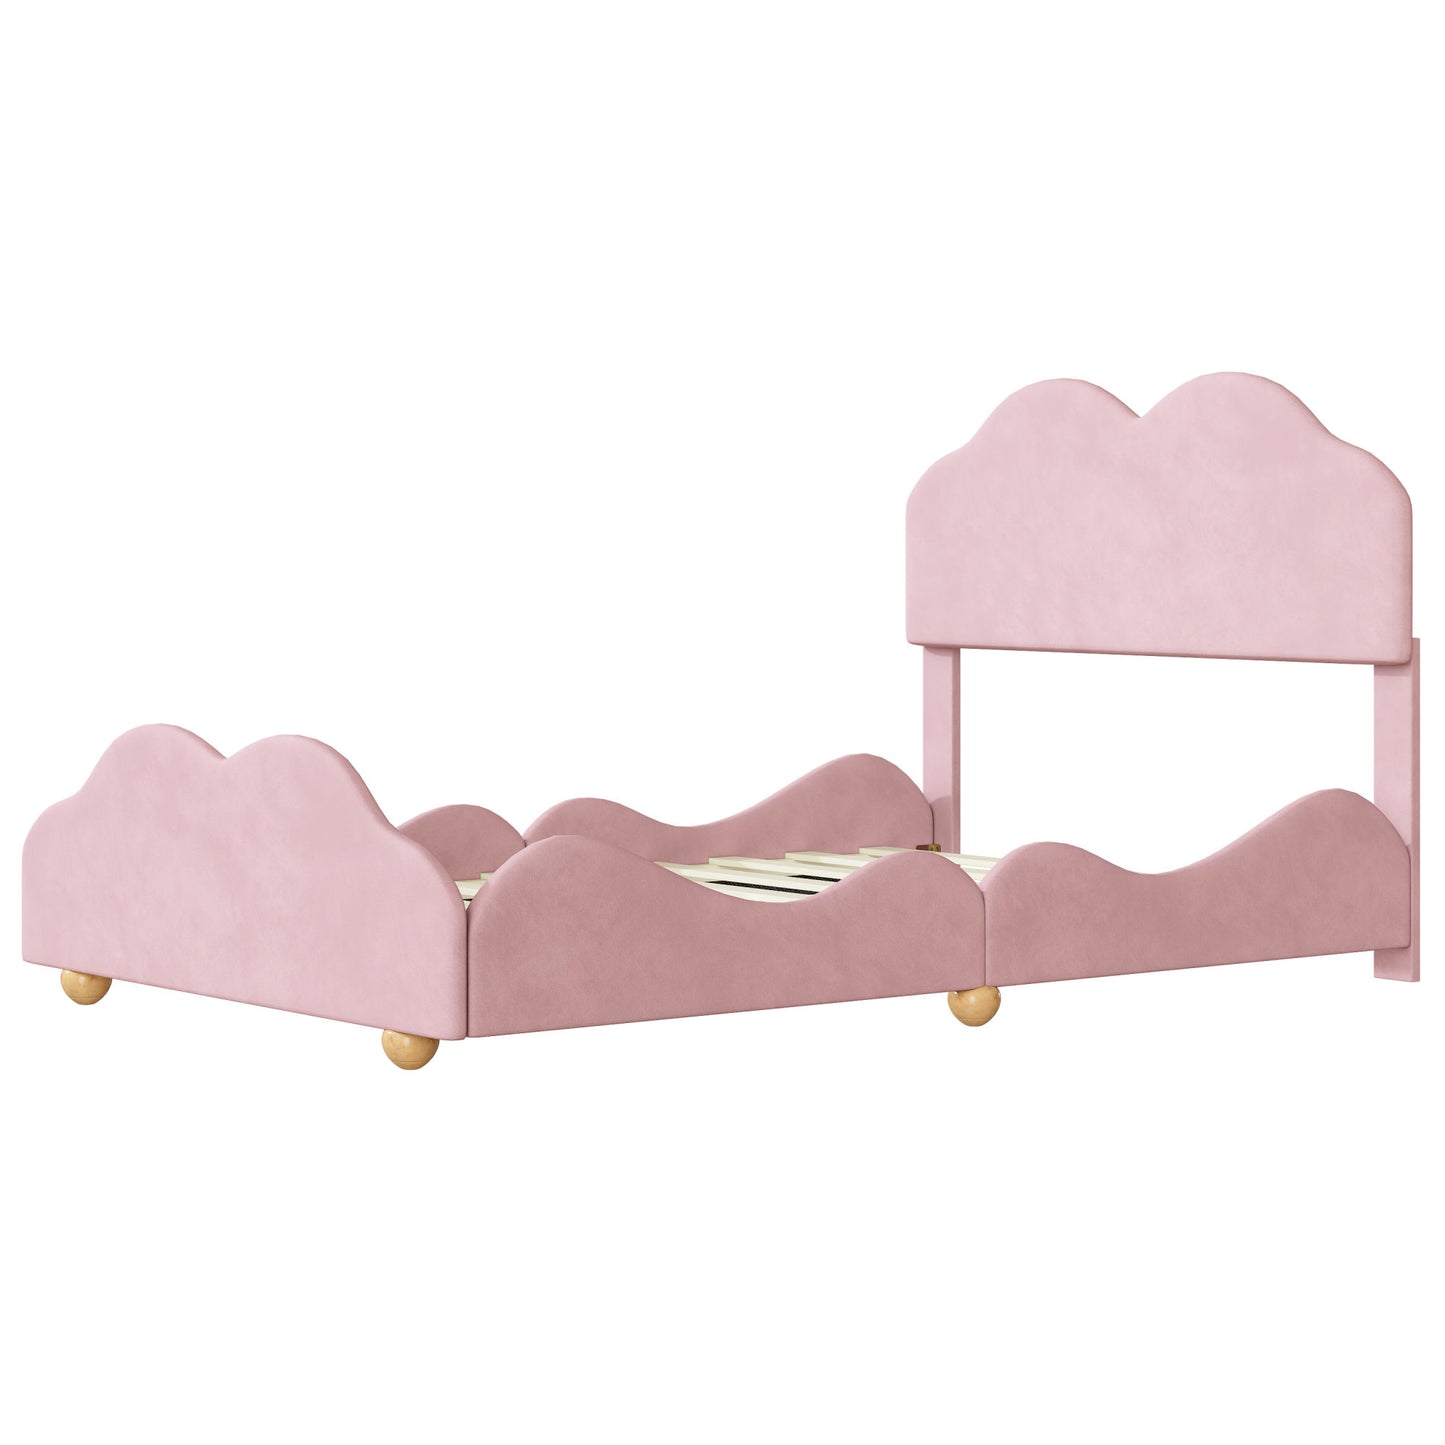 upholstered bed with cloud shaped bed board, light pink